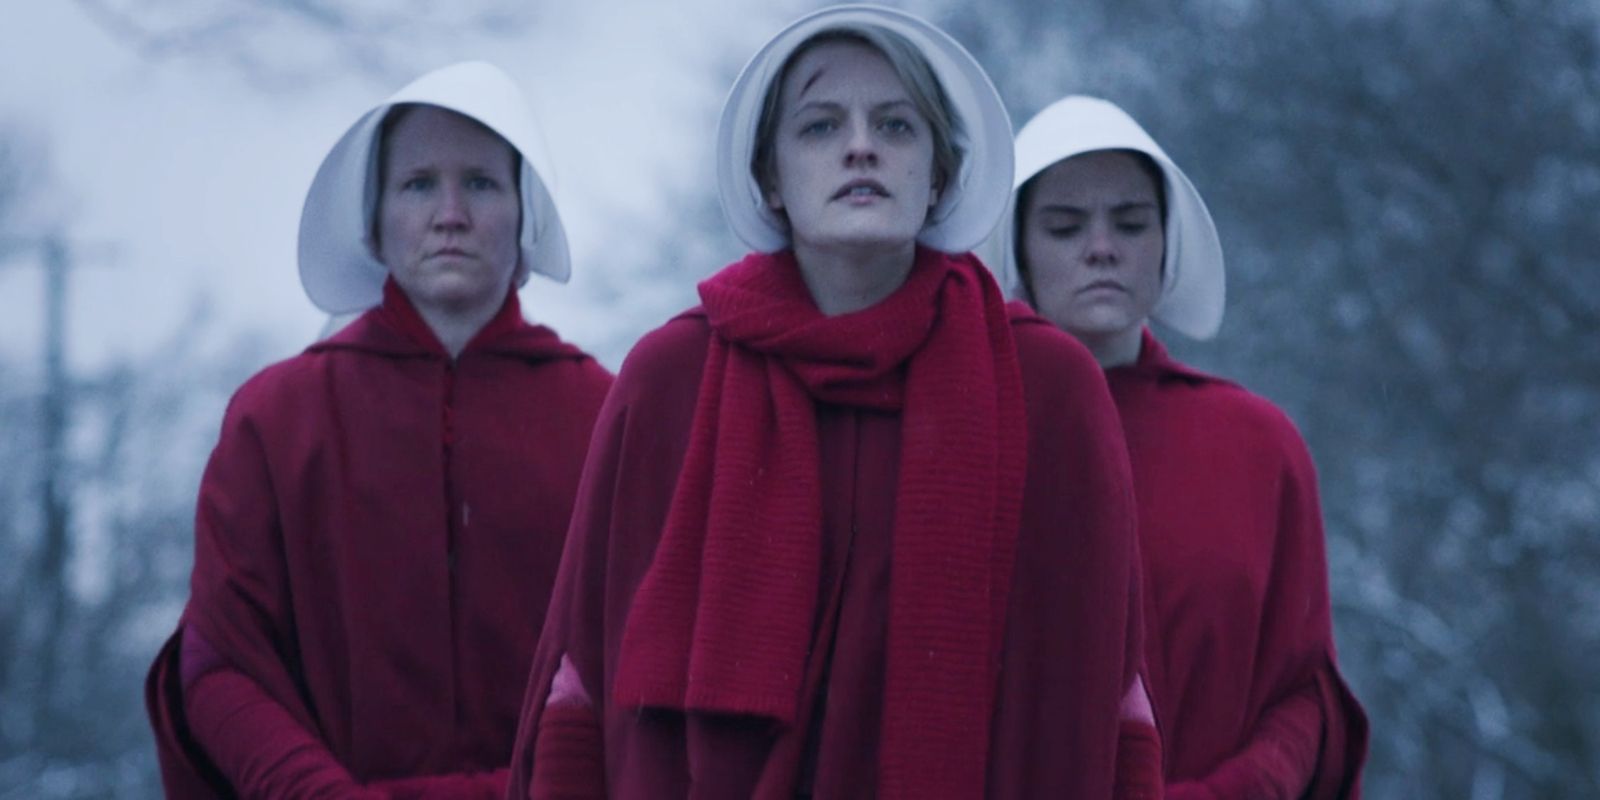 Offred leading handmaids in The Handmaid's Tale